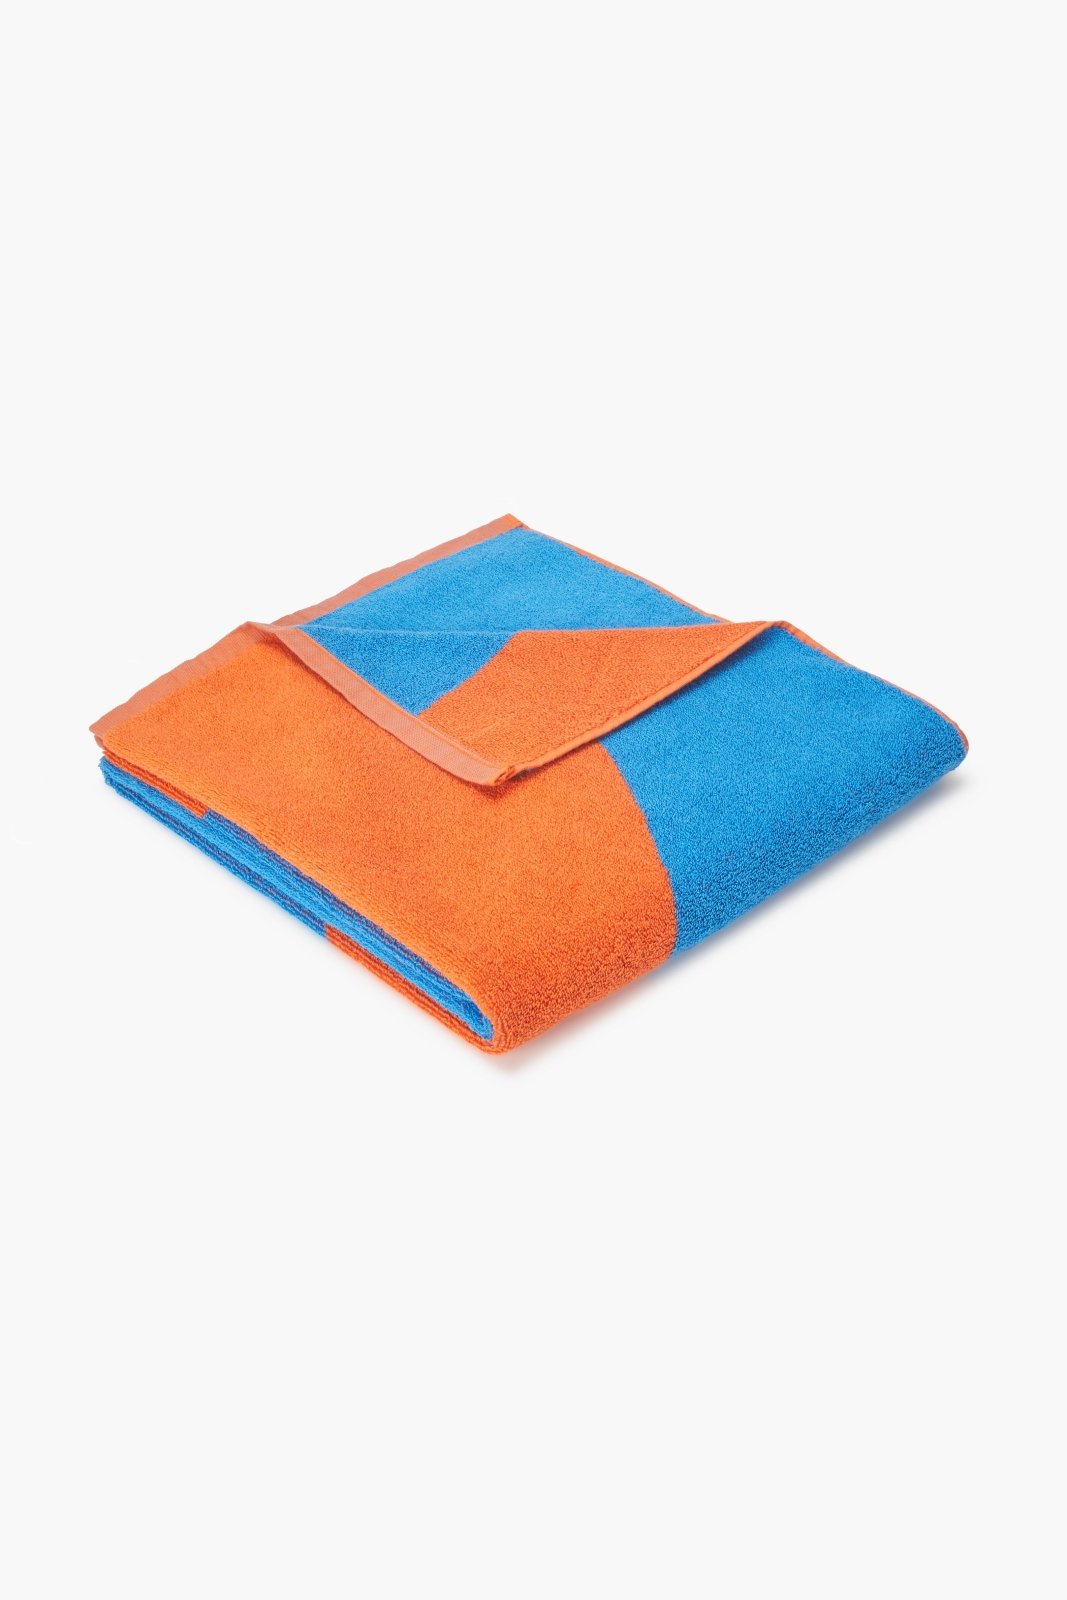 The Beach Towel - Solid & Striped